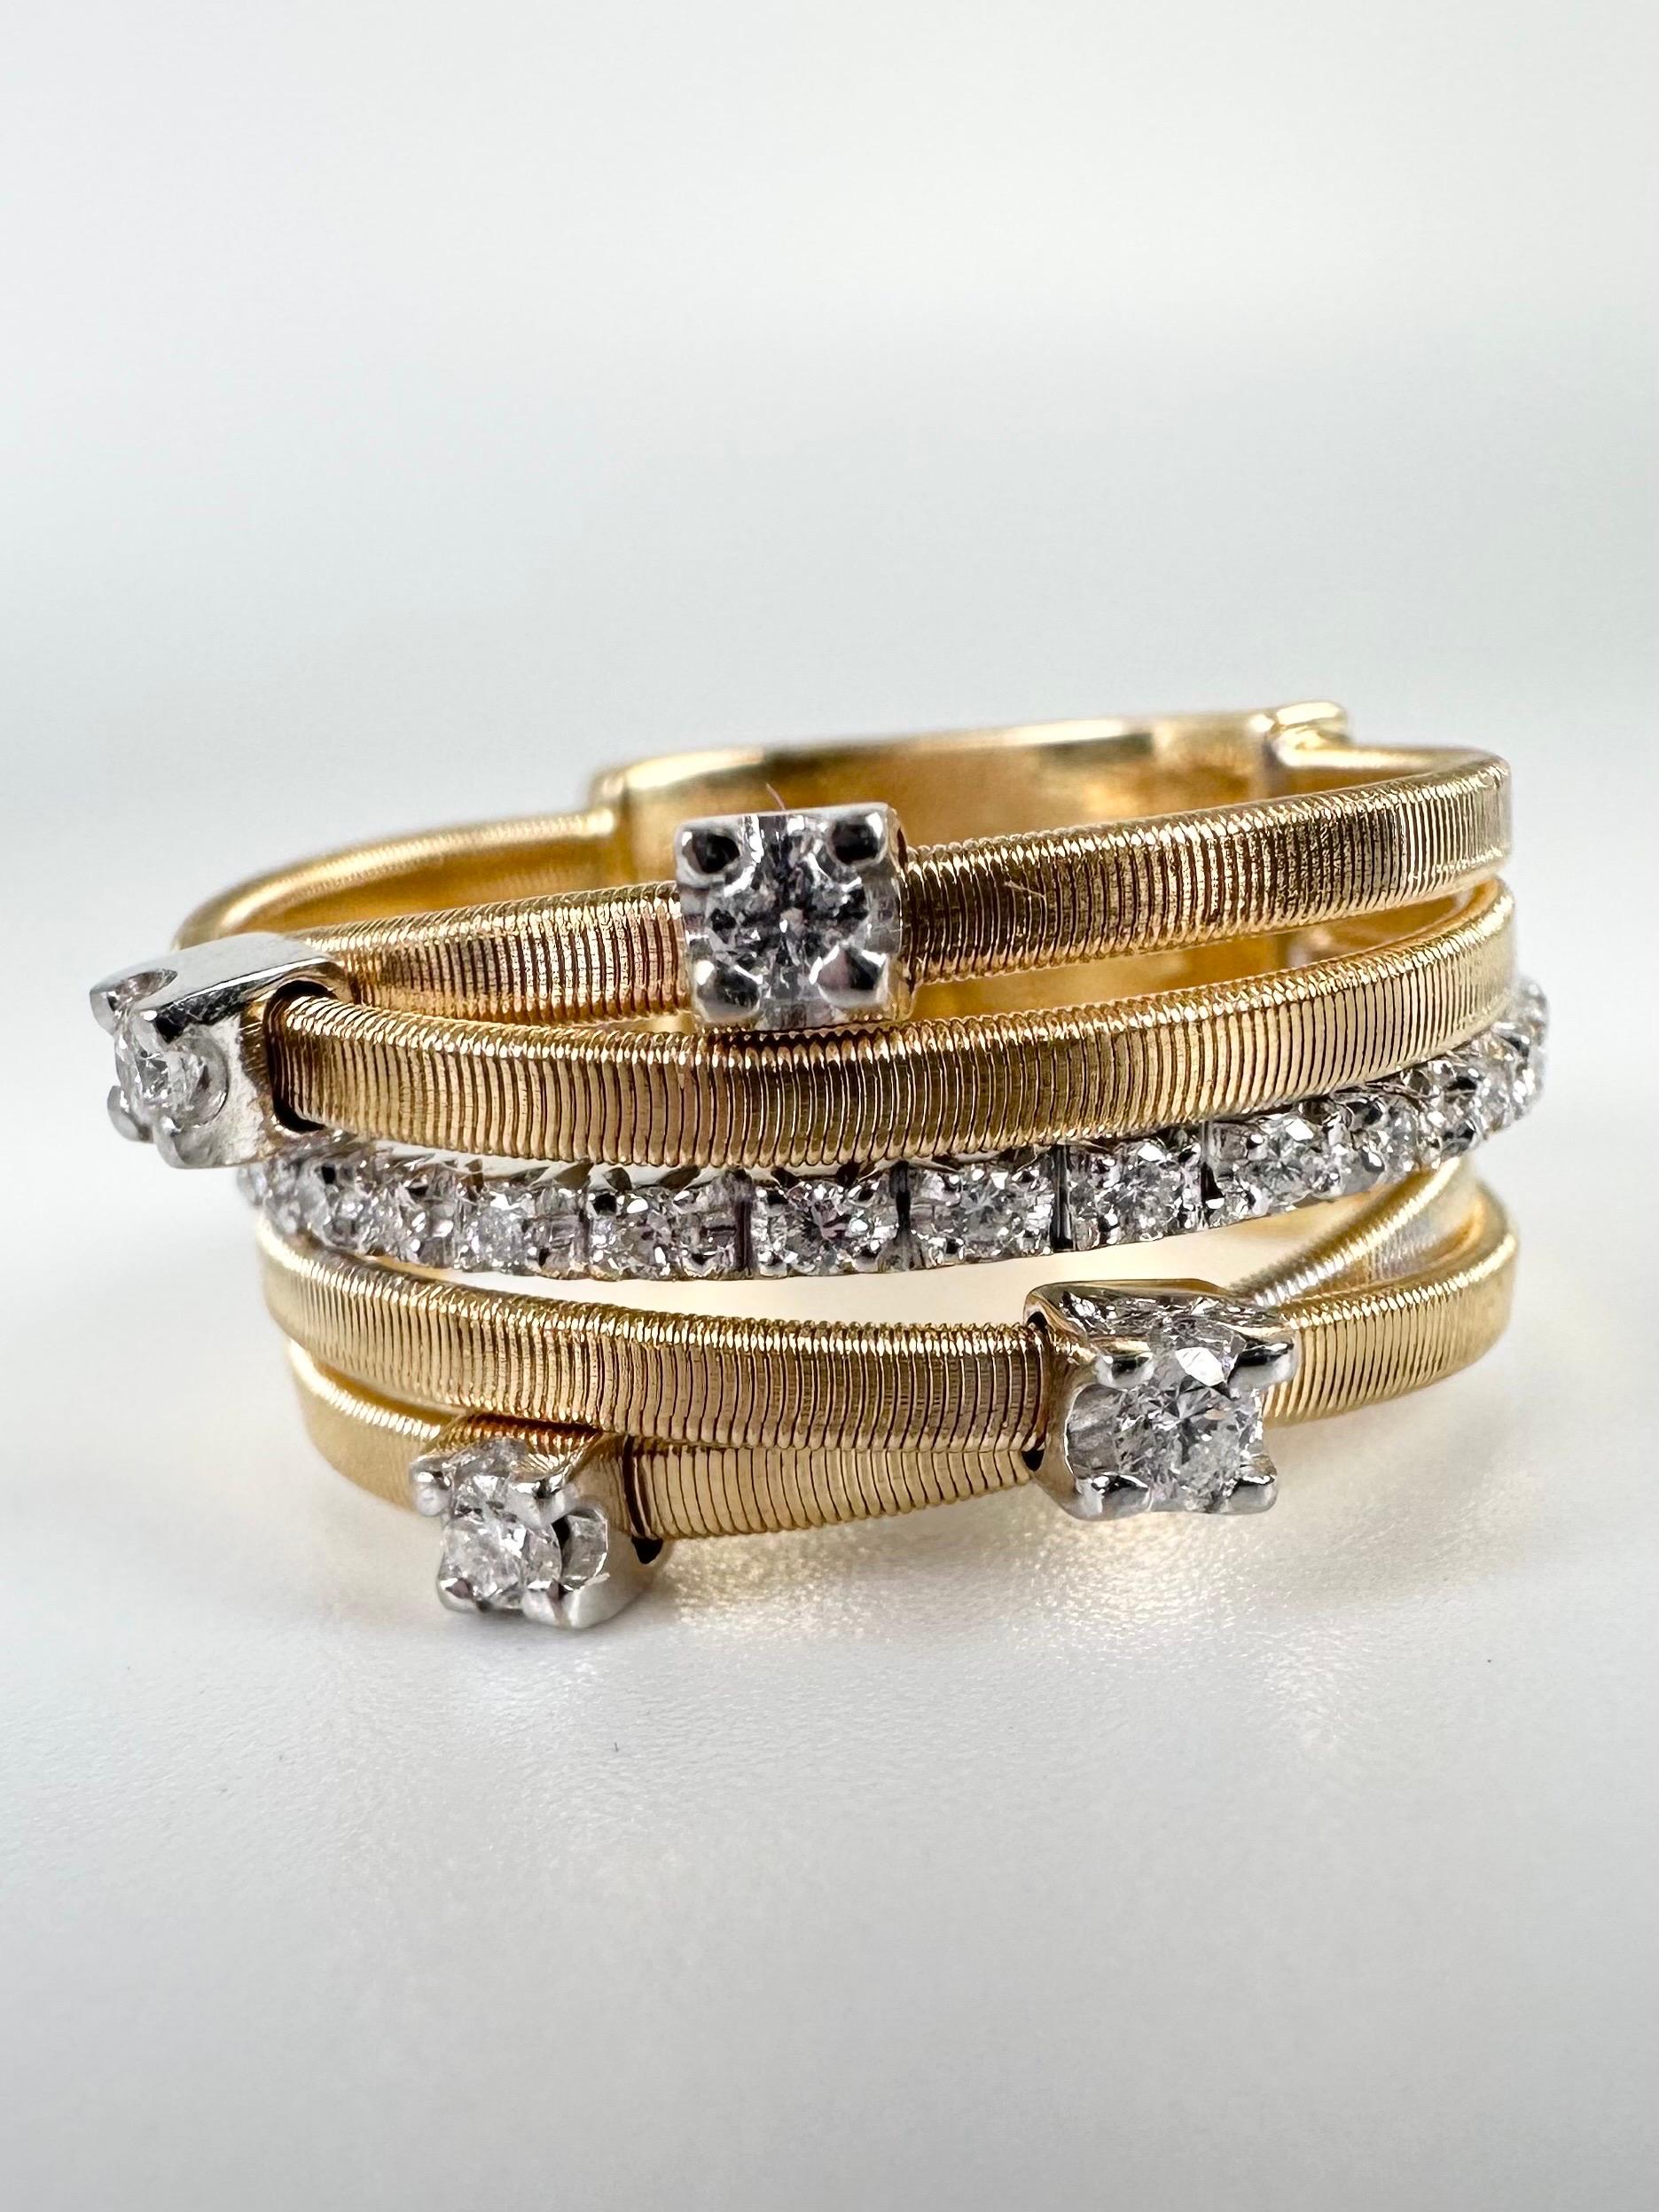 Unique 5 row diamond ring by Bicego, the gold textured ring rows with plished onces make this ring of a unique design, very modern with a playful texture. Looks fantastic on hand and very comfortable!

GOLD: 18KT gold
NATURAL